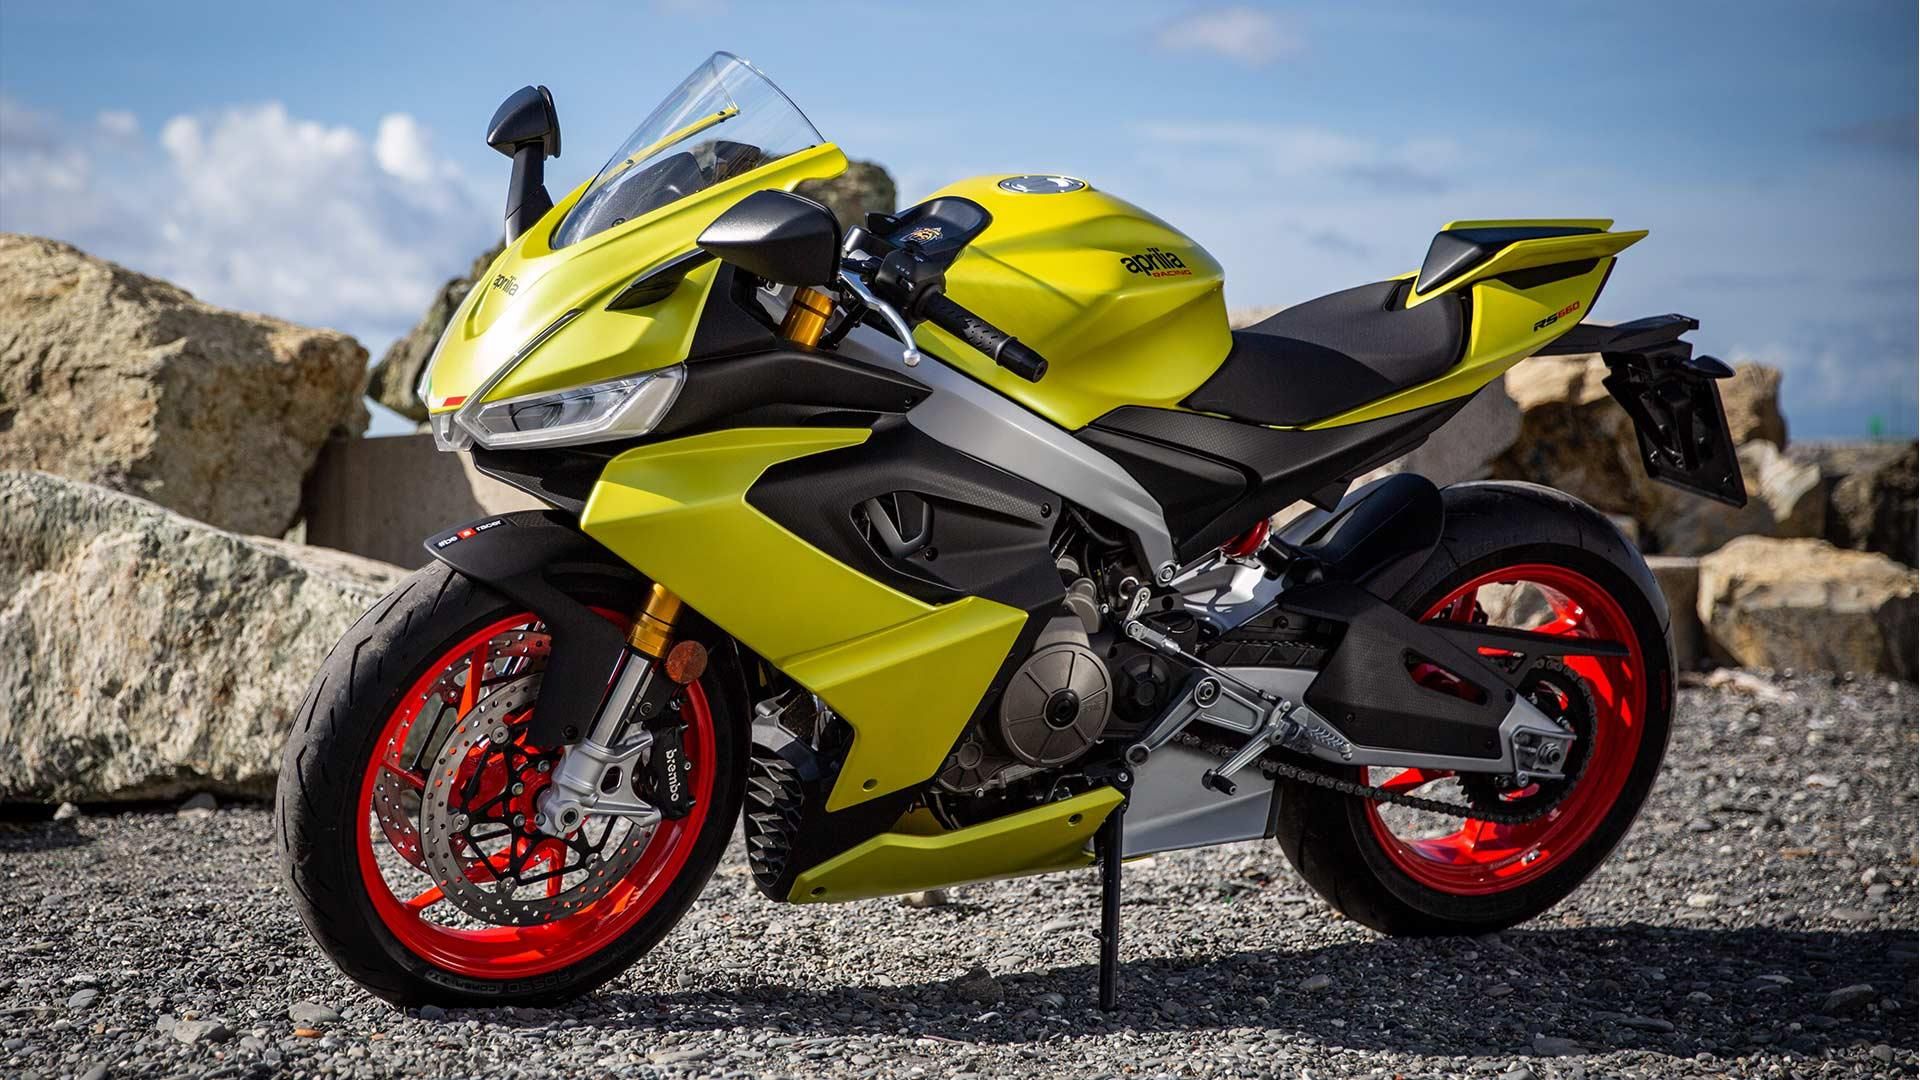 Aprilia RS 660 Top Speed Test Reveals Some Serious Performance